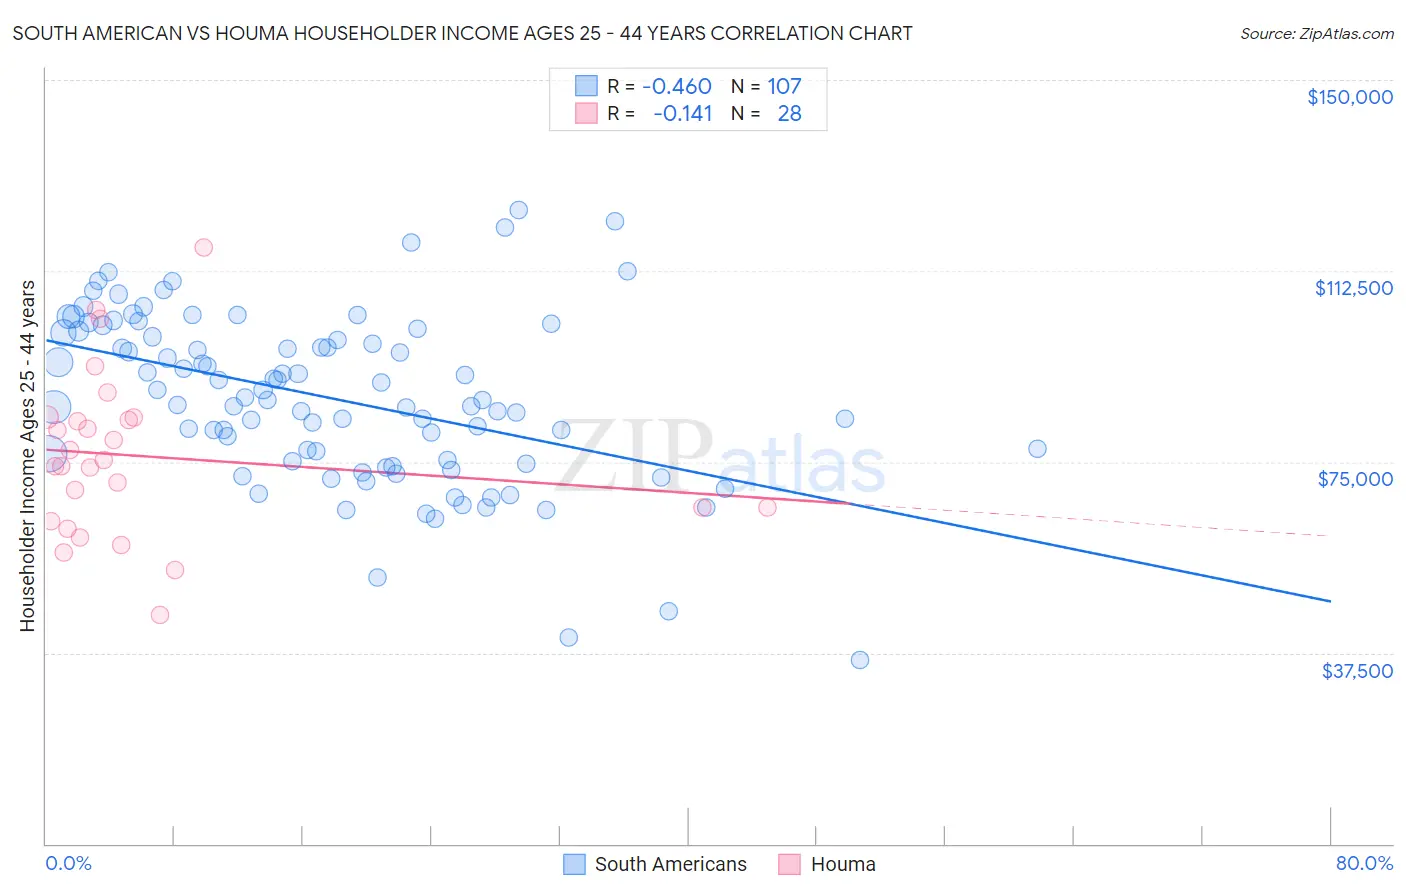 South American vs Houma Householder Income Ages 25 - 44 years